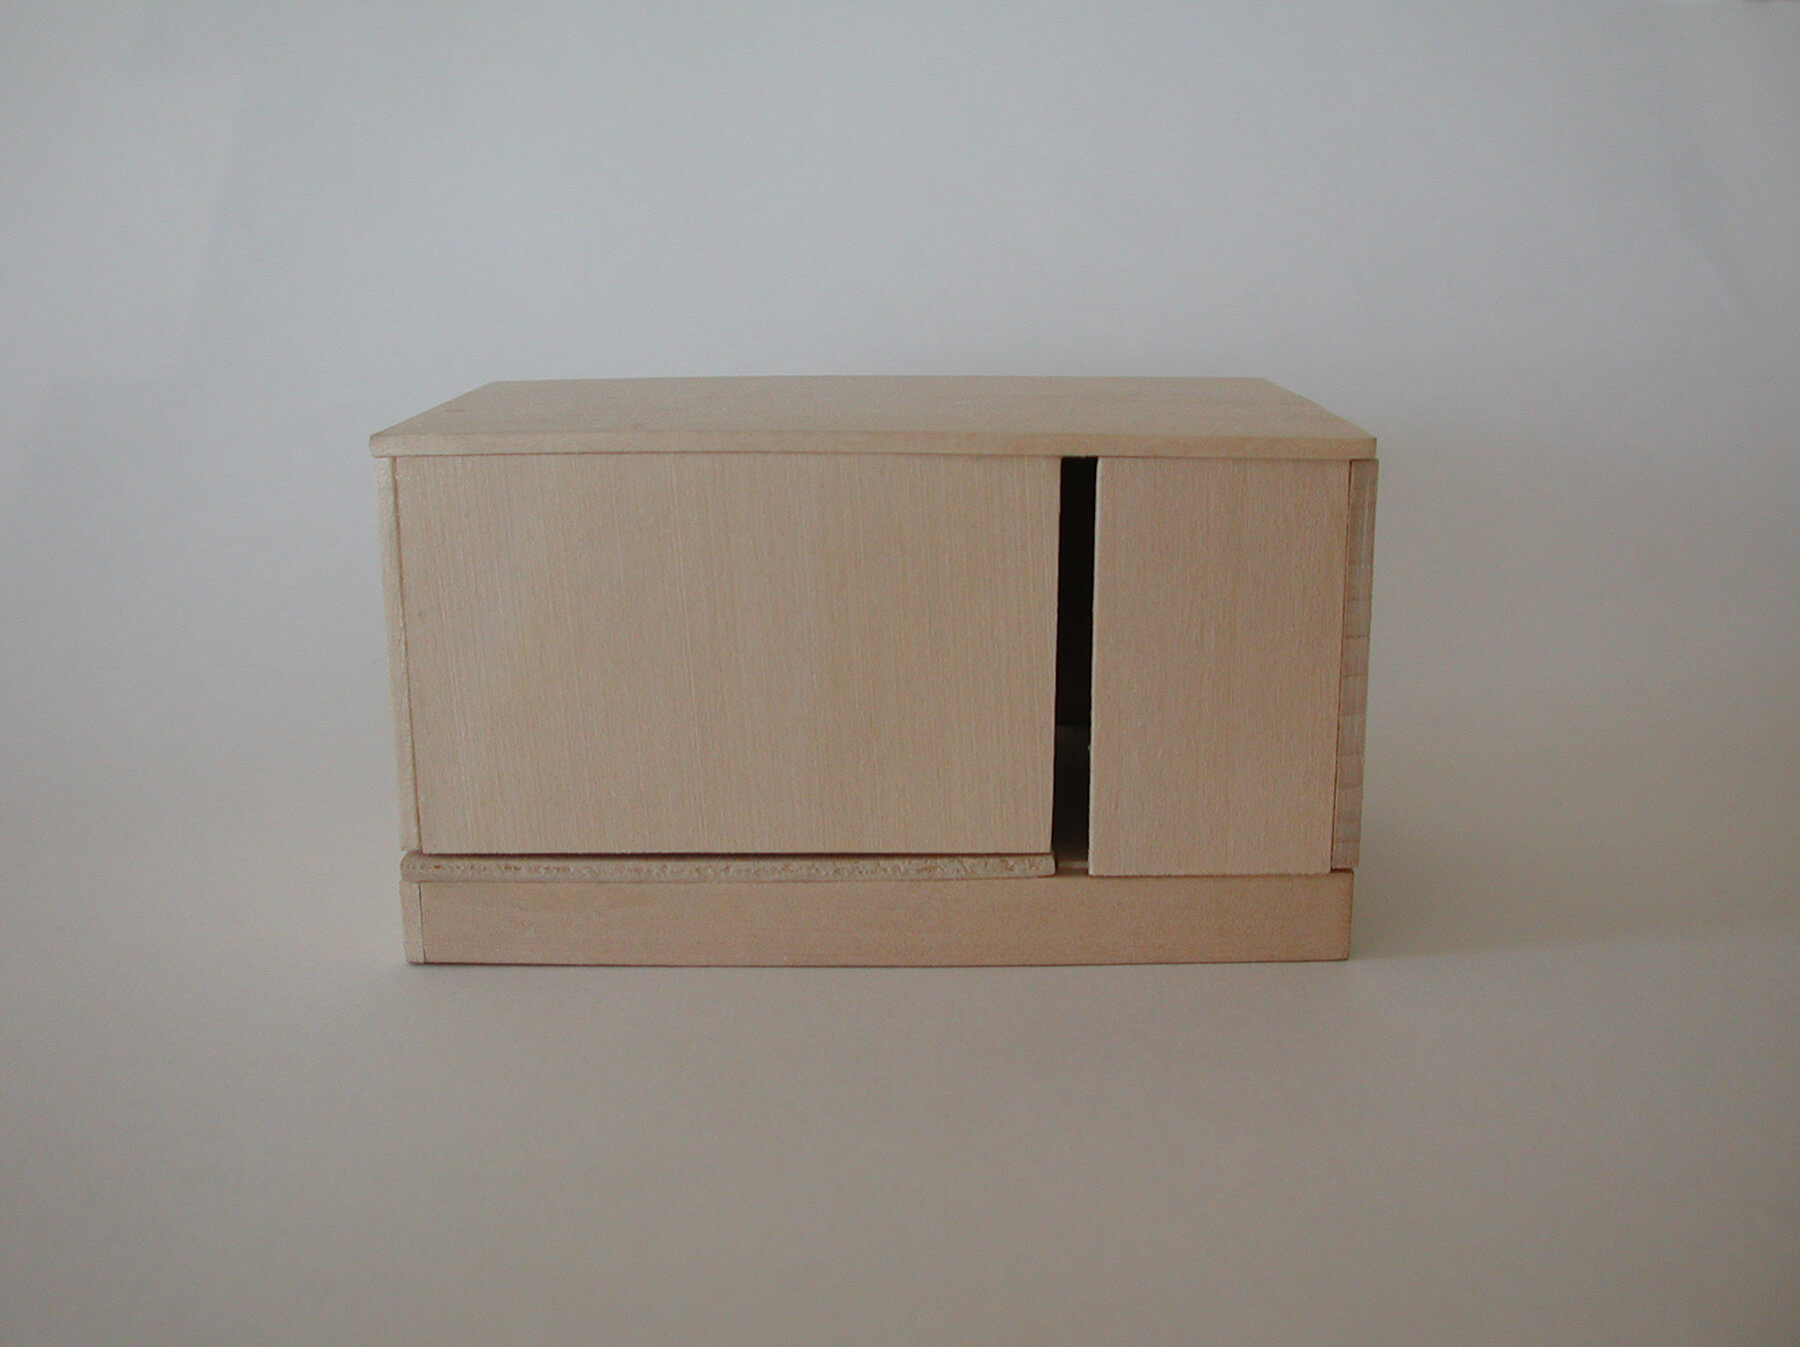 Wood, 4 ½ x 3 x 2 ½ in, 2001